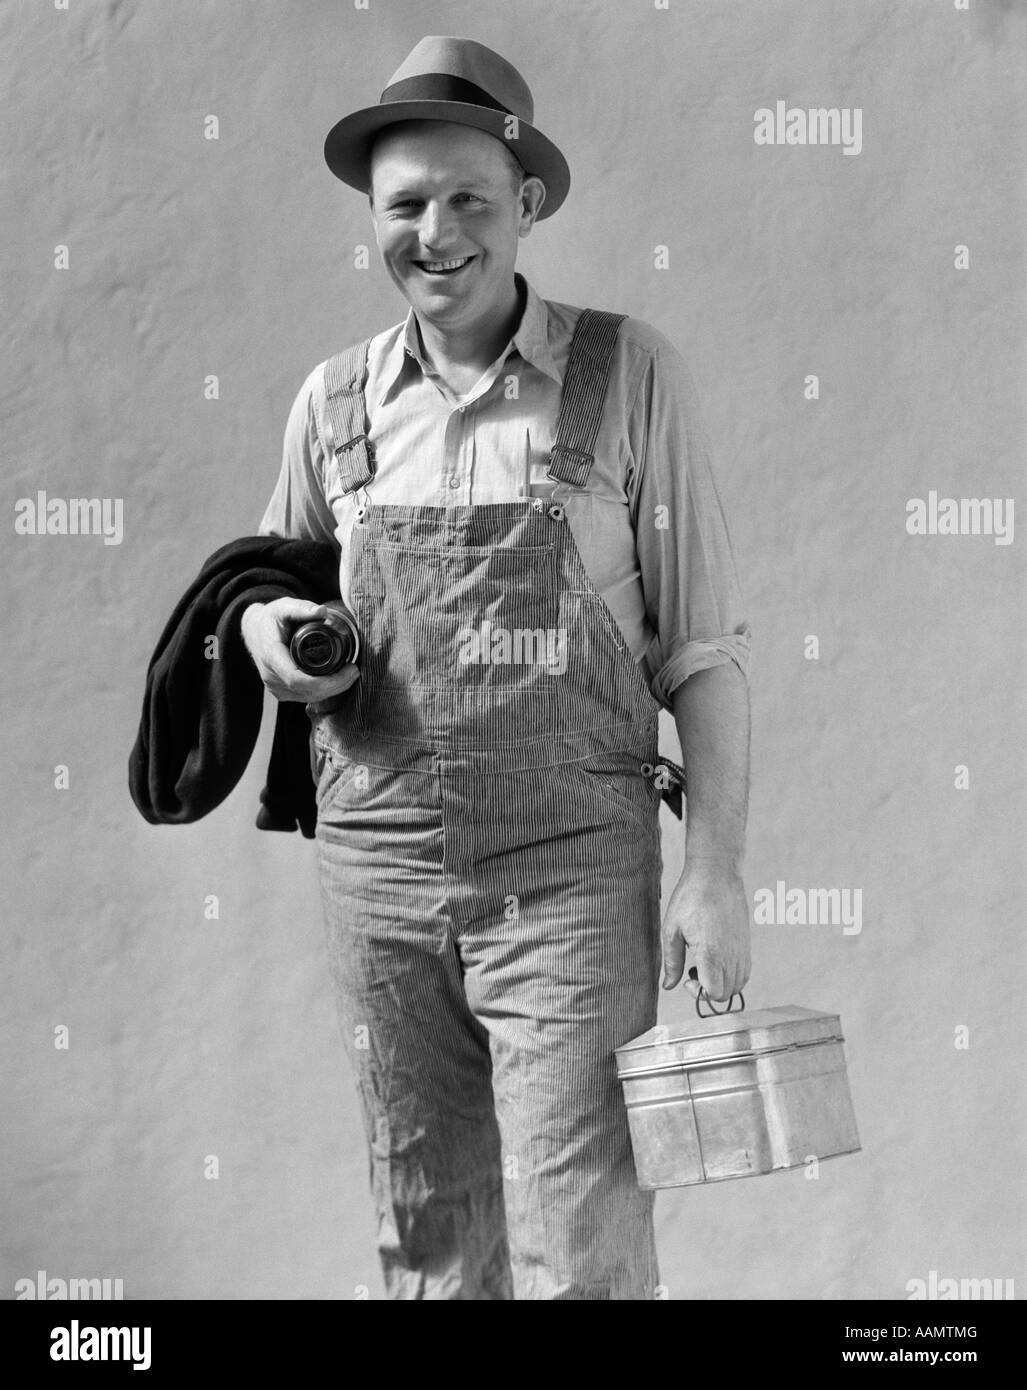 https://c8.alamy.com/comp/AAMTMG/1930s-smiling-man-in-work-clothes-overalls-holding-lunch-box-thermos-AAMTMG.jpg